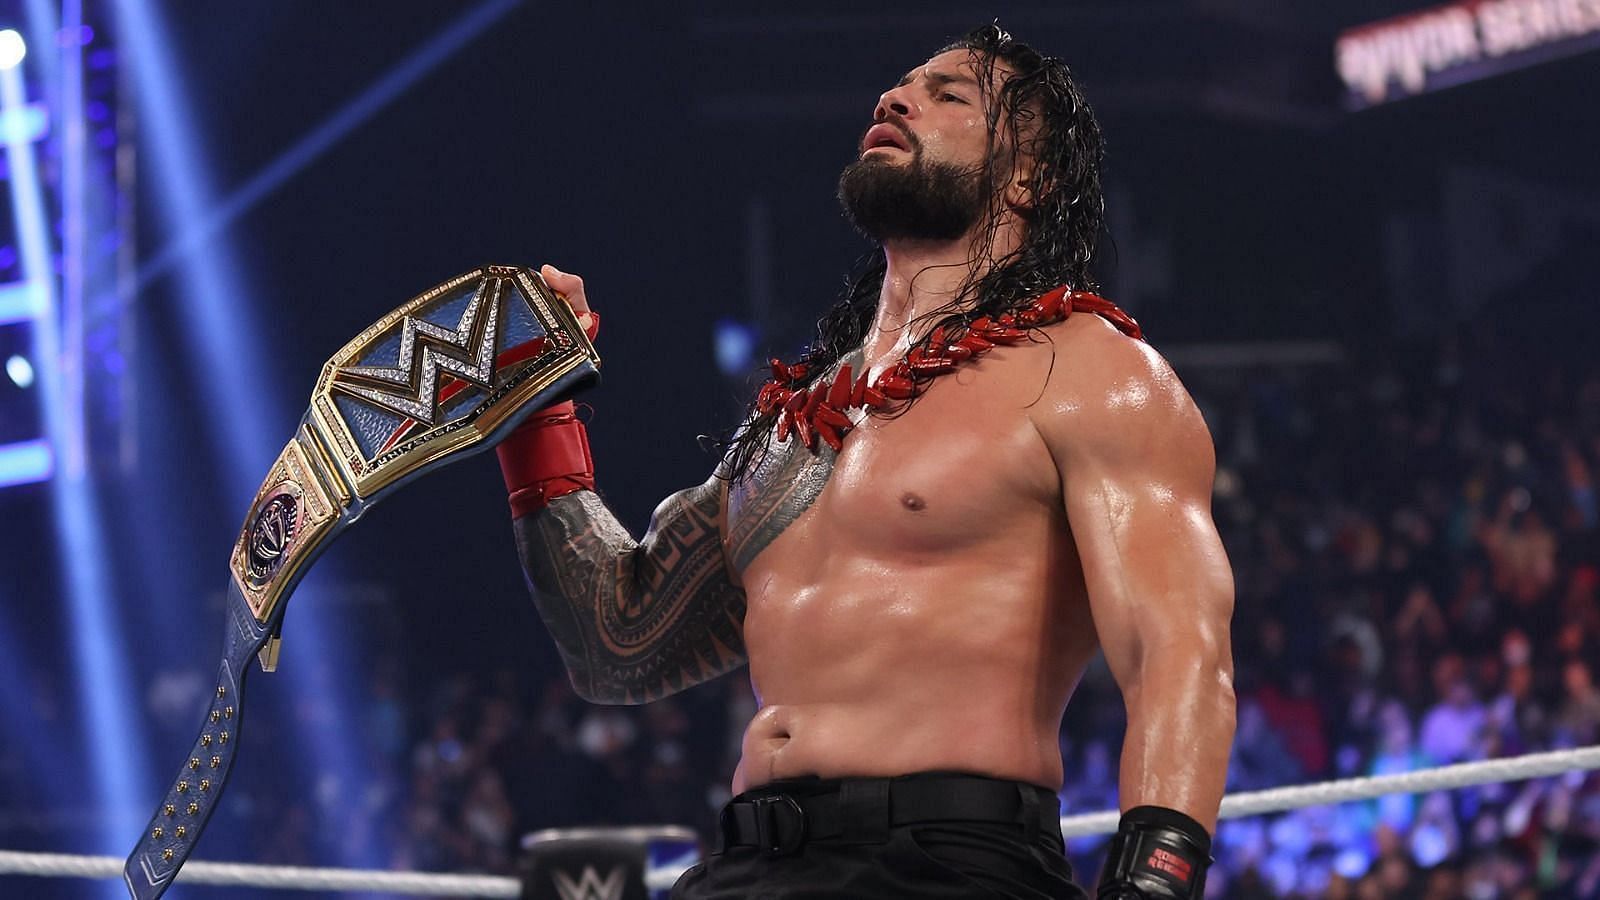 The Undisputed Universal Champion, Roman Reigns